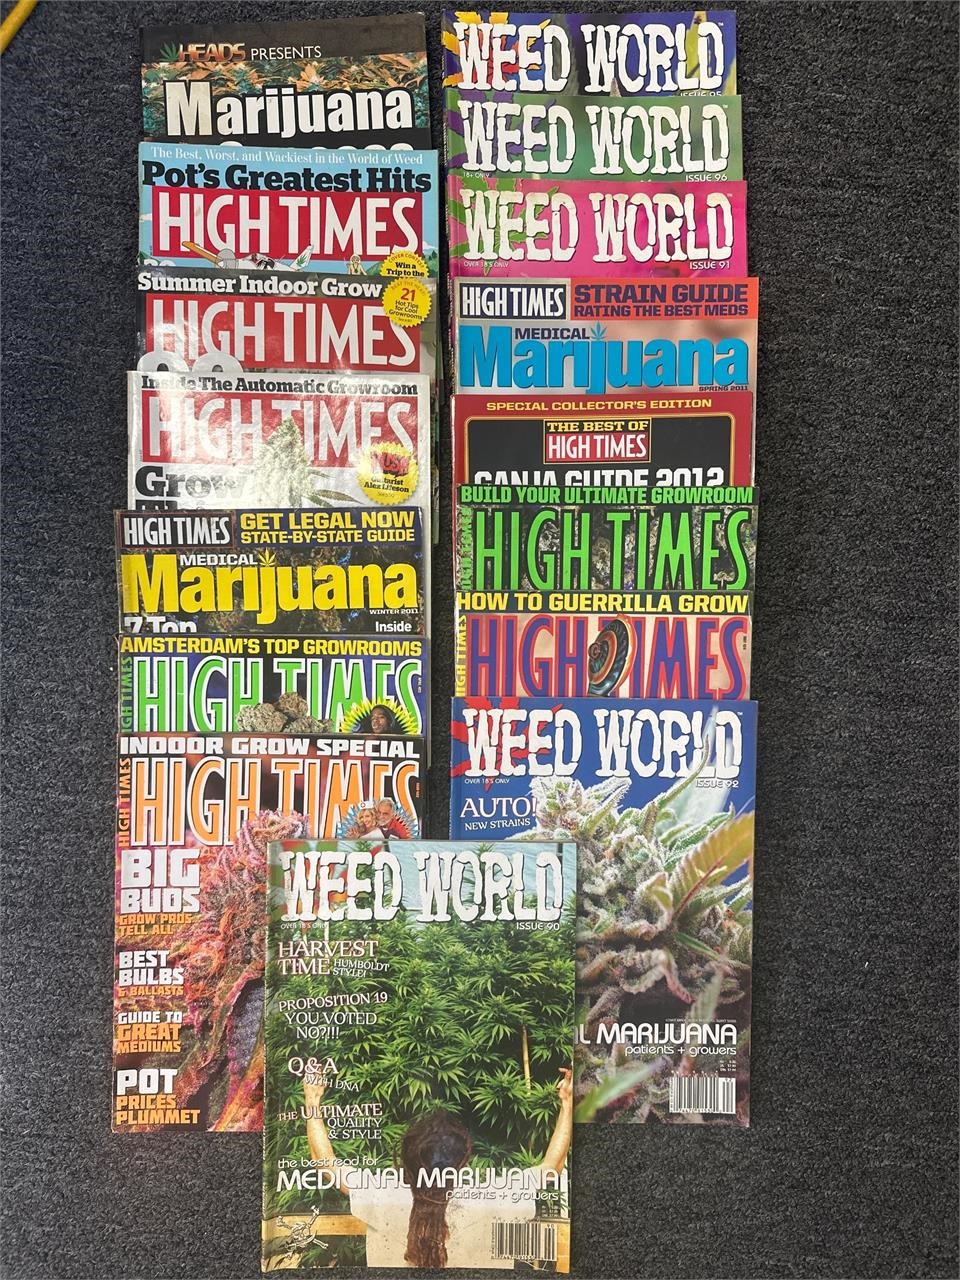 High times and other magazines